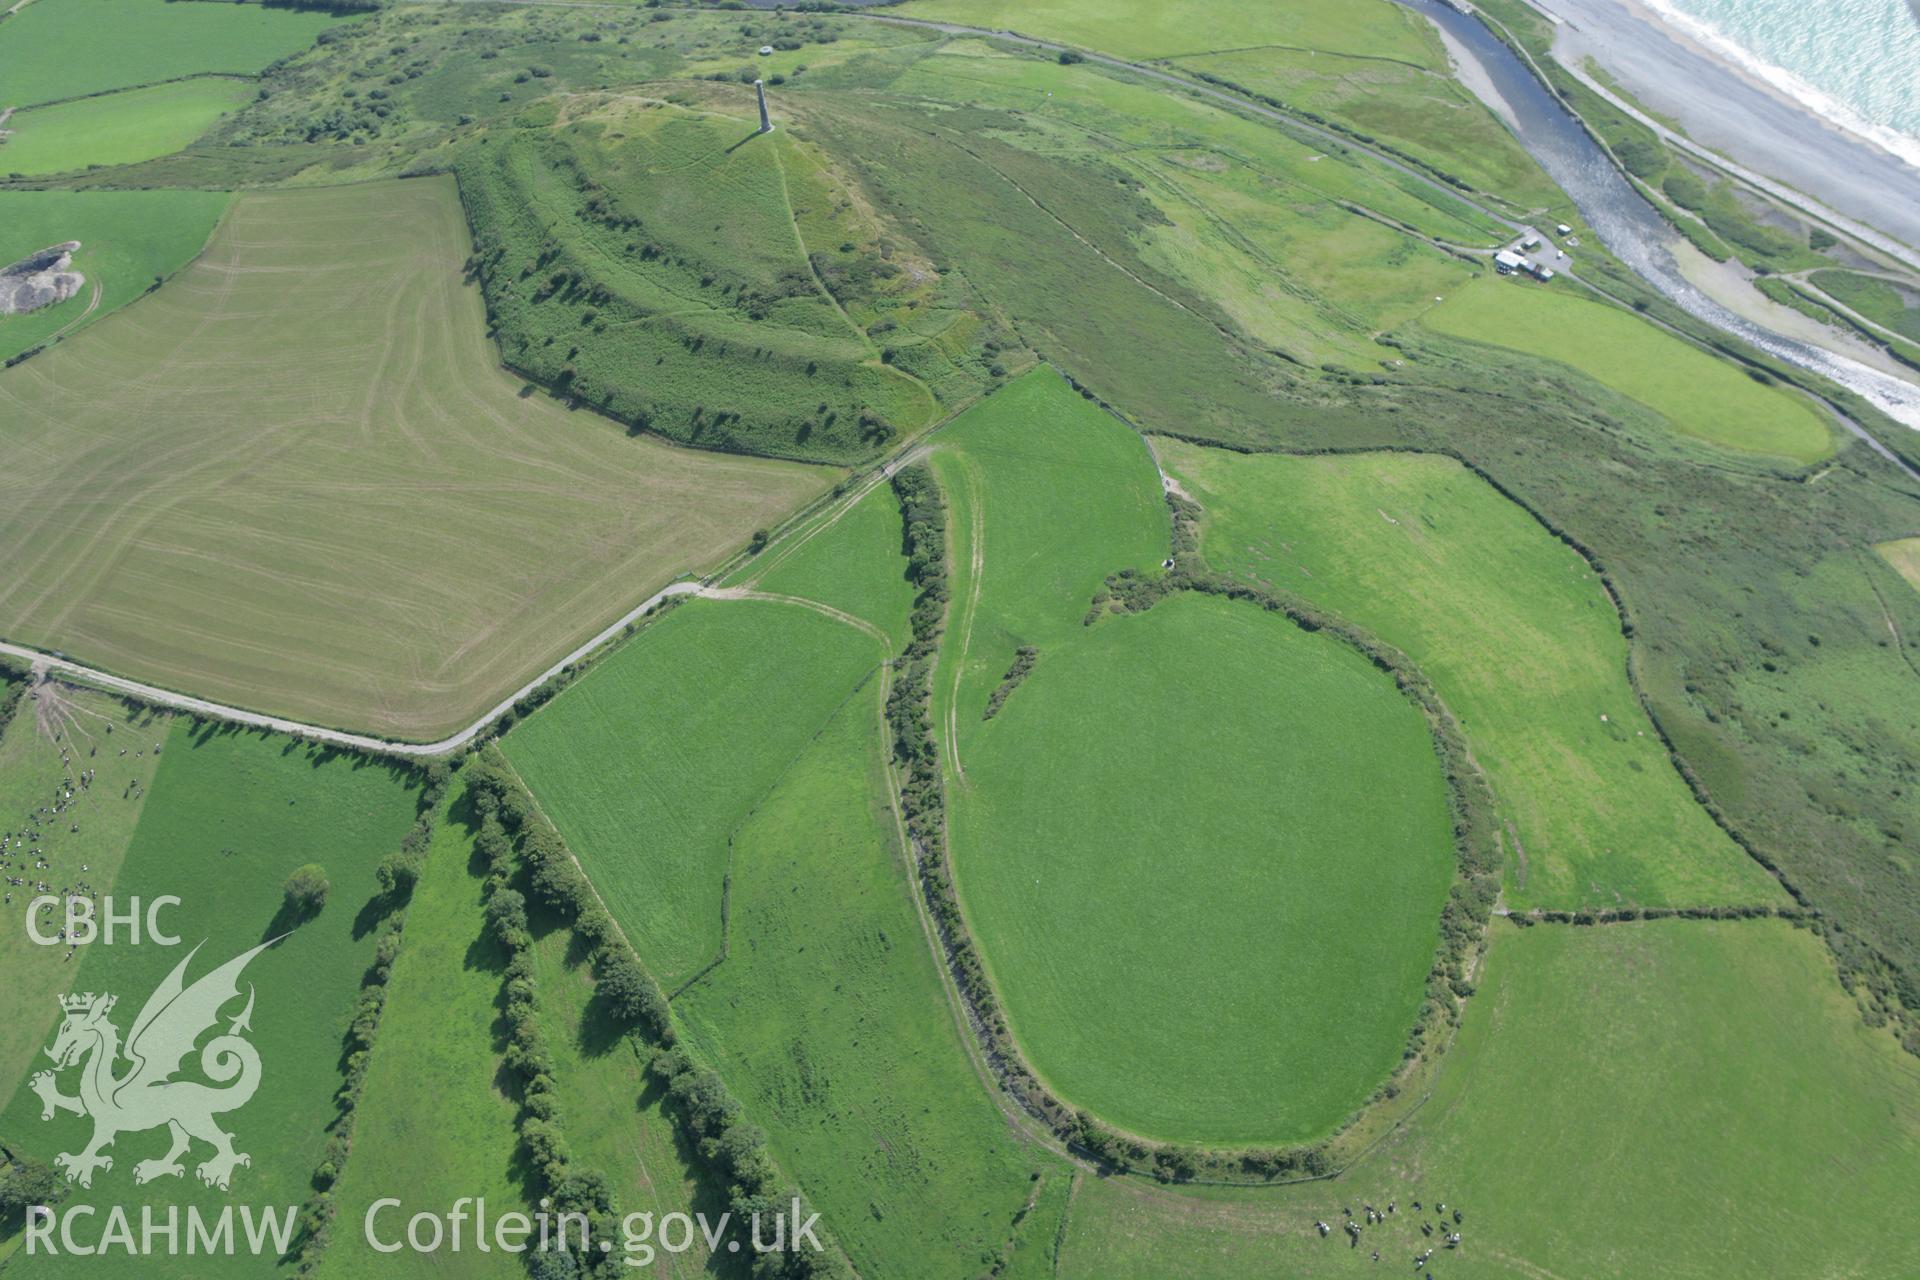 RCAHMW colour oblique photograph of Pen Dinas hillfort. Taken by Toby Driver and Oliver Davies on 28/06/2011.